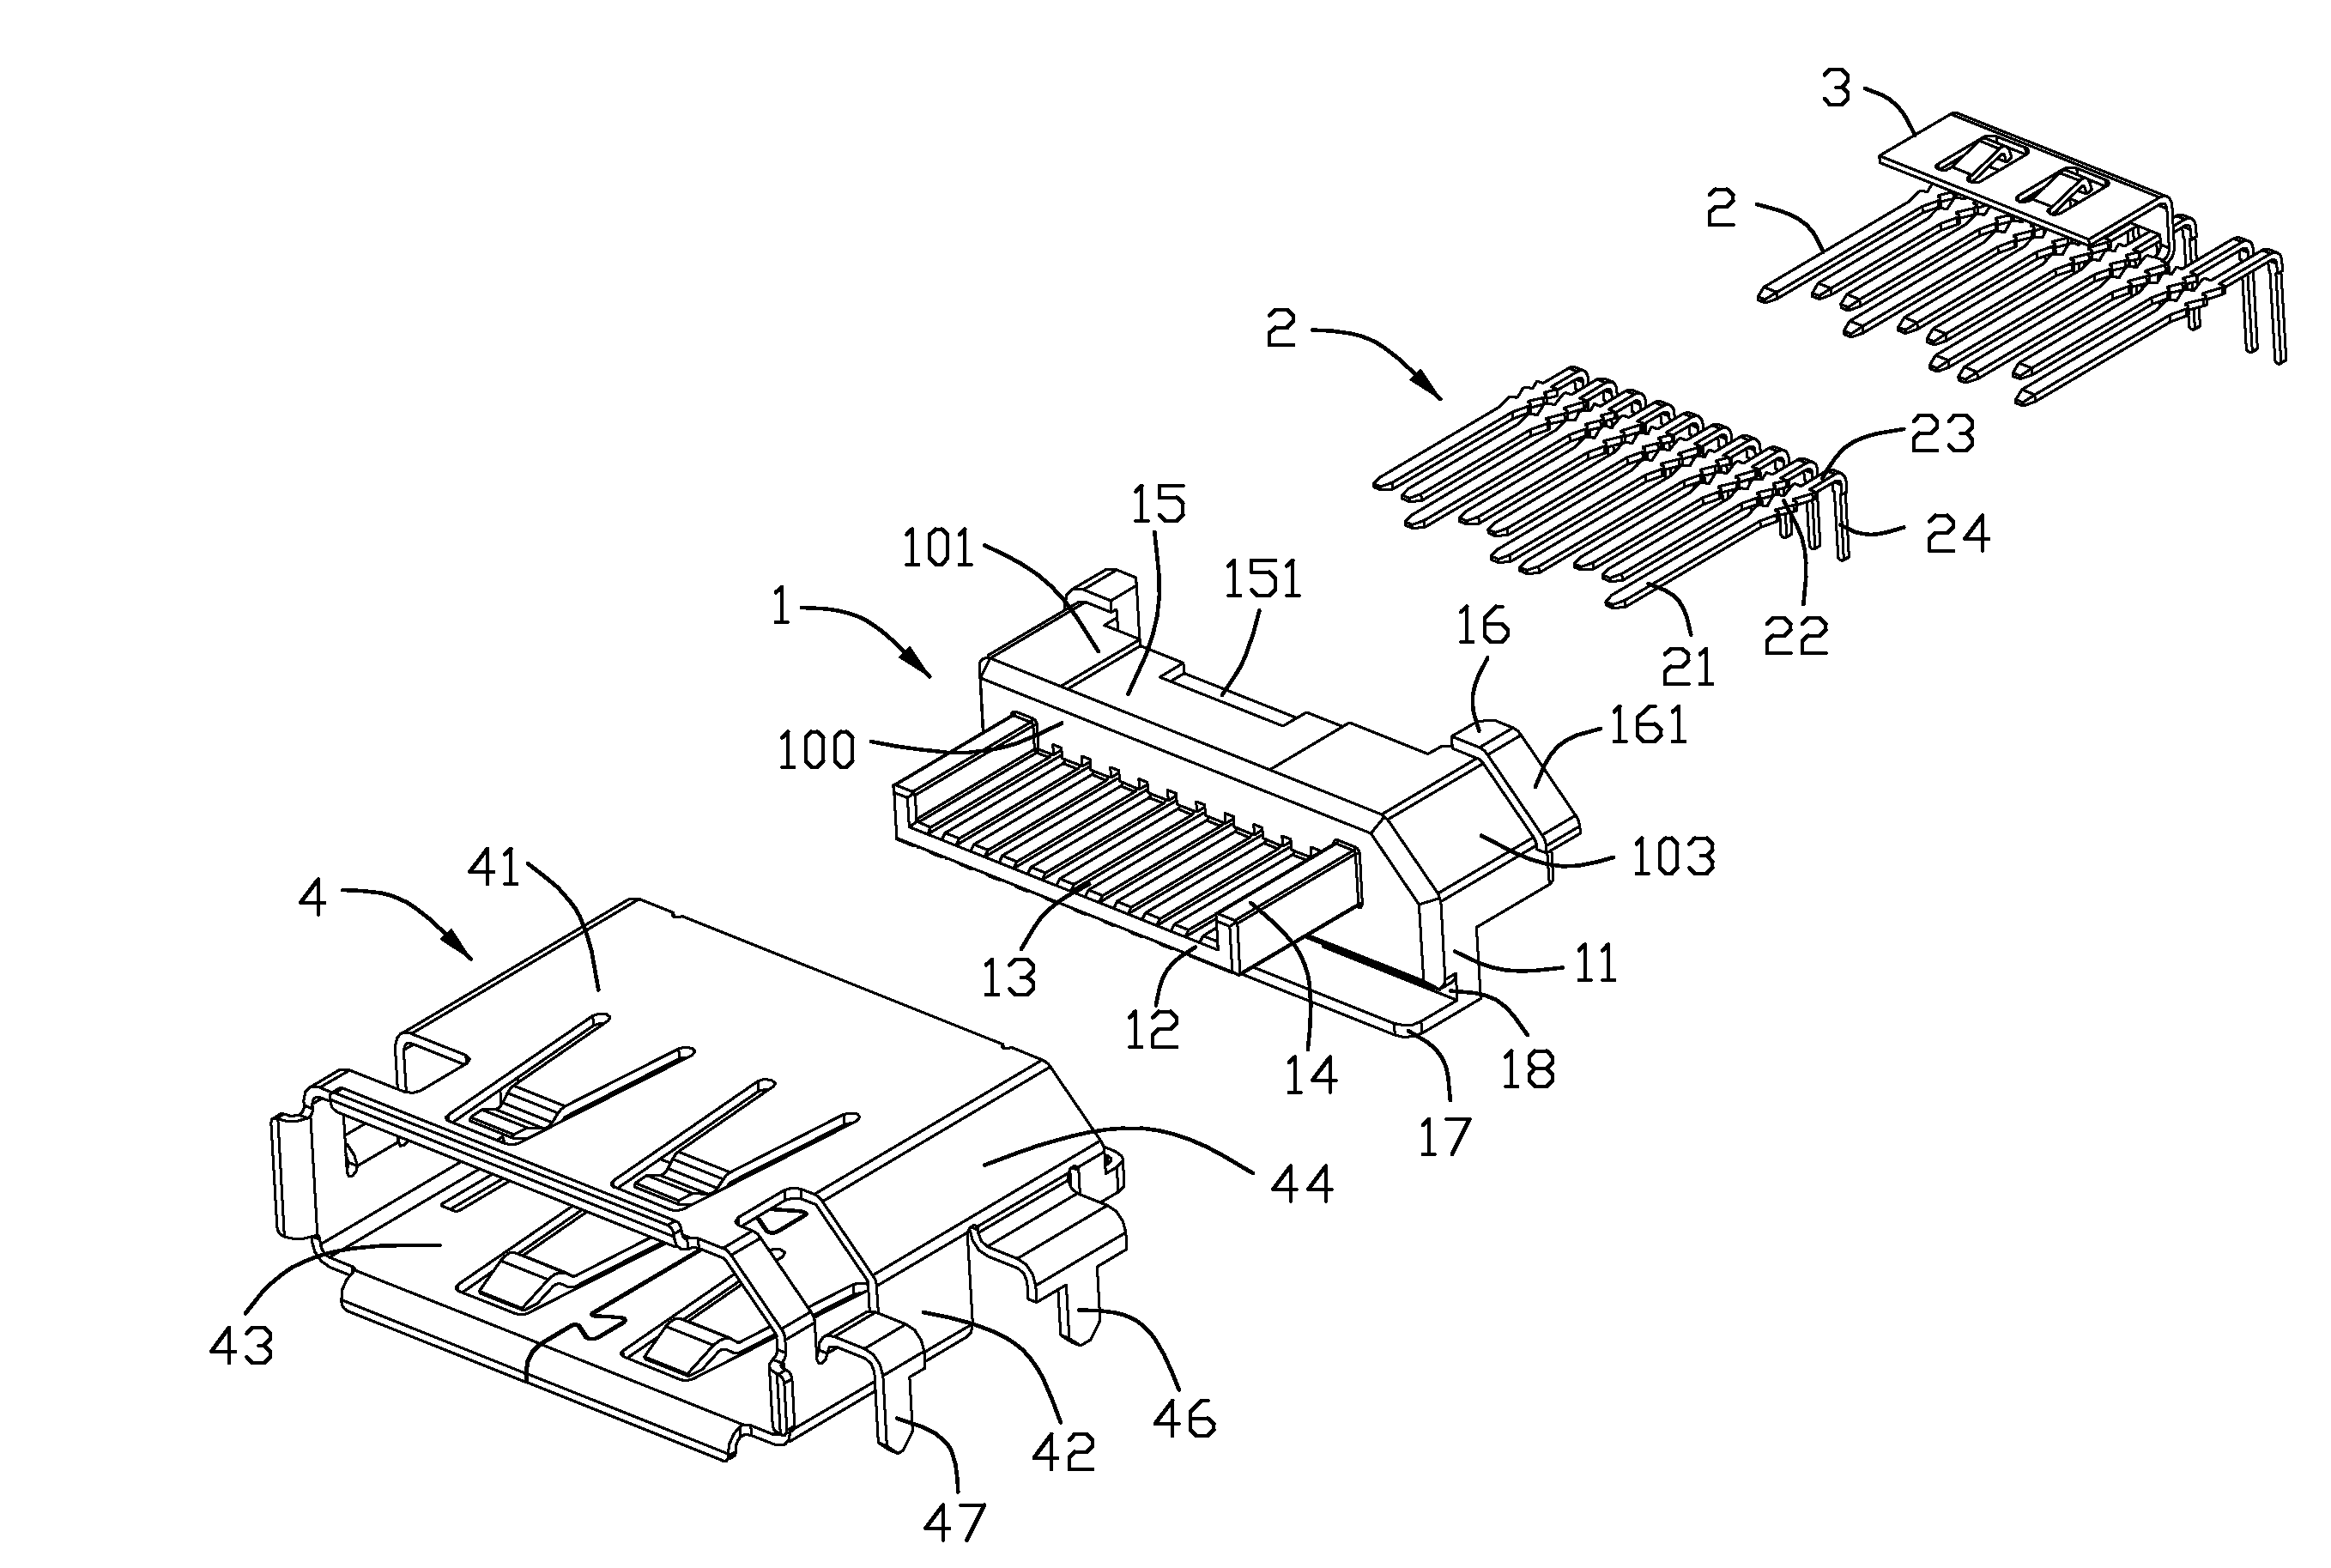 Electrical connector having grounding terminal having tail portion interconnected to metallic shell surrounding the connector